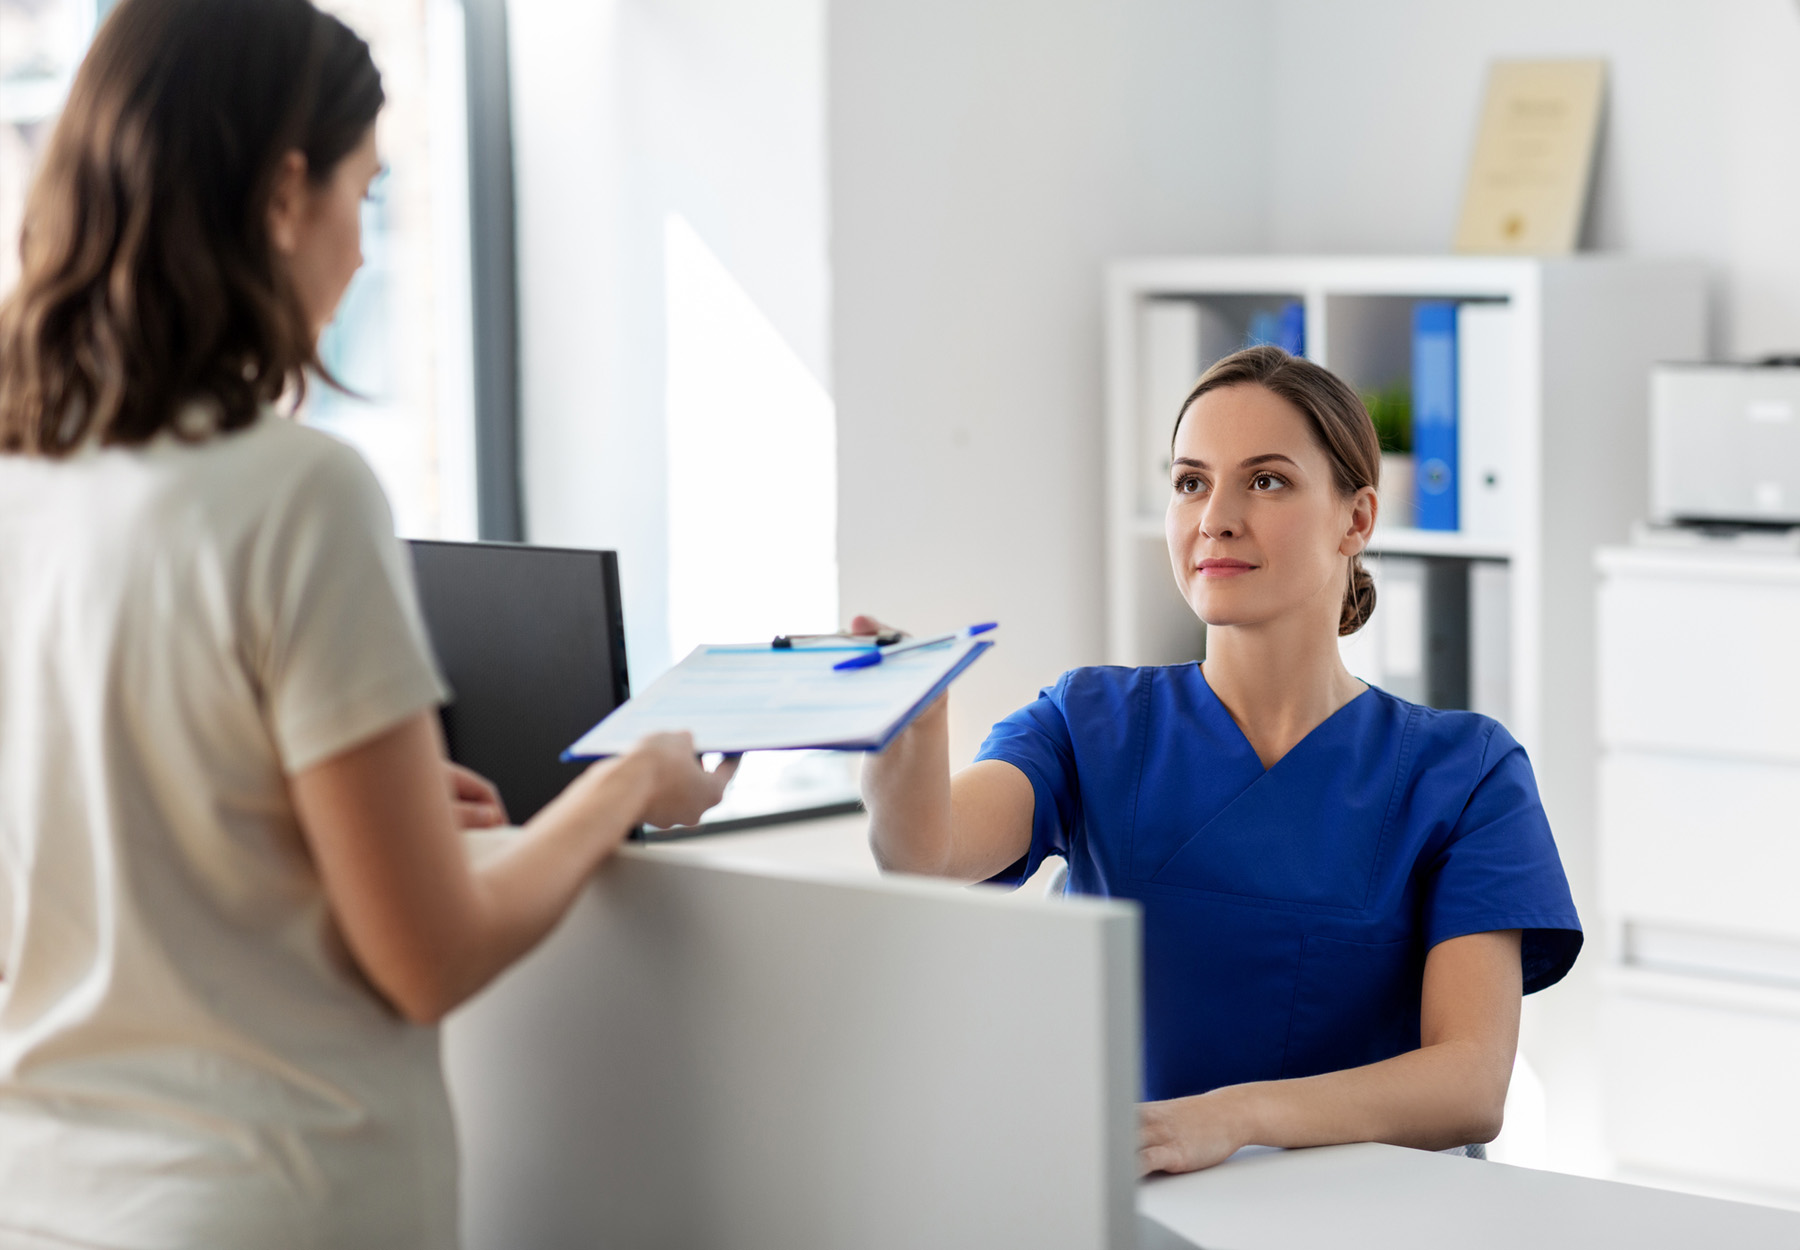 Healthcare professional in blue scrubs sits at her desk and hands a clipboard with a form on it to a female patient. Stock photo.